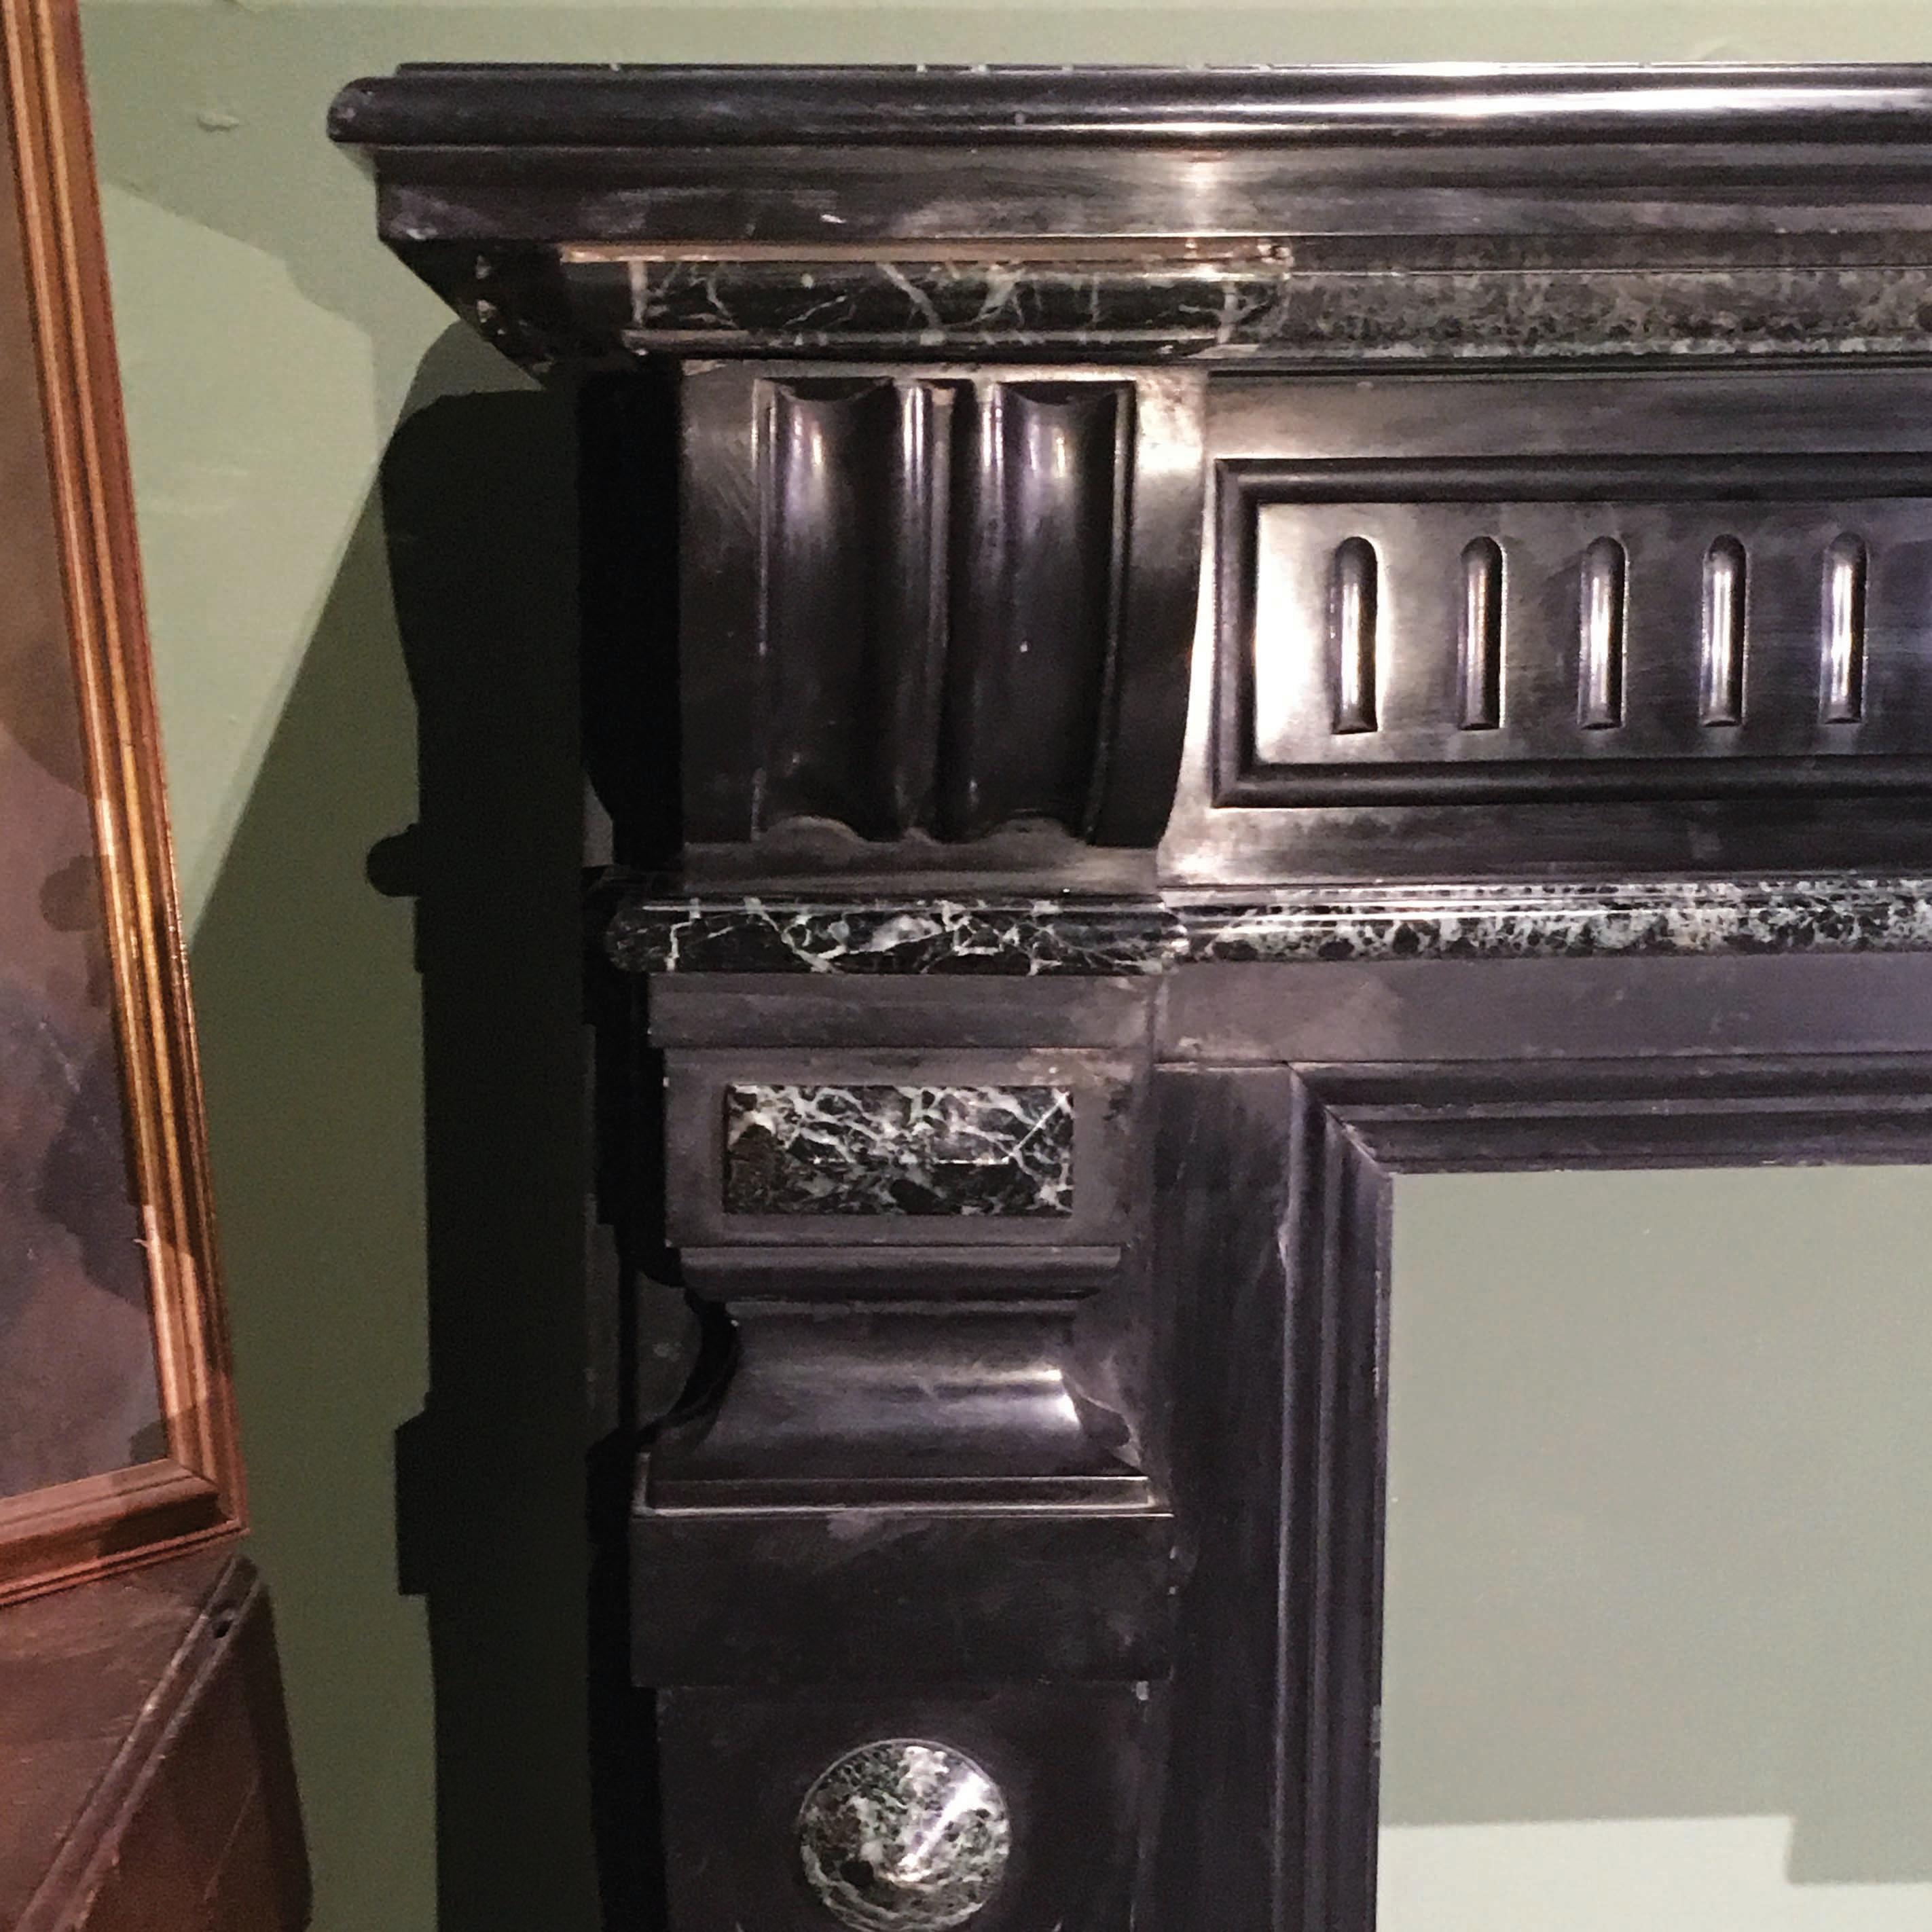 An elegant Tuscan marble fireplace from the early 20th century.
The fireplace presents two beautiful qualities of marble - the Belgian black marble 